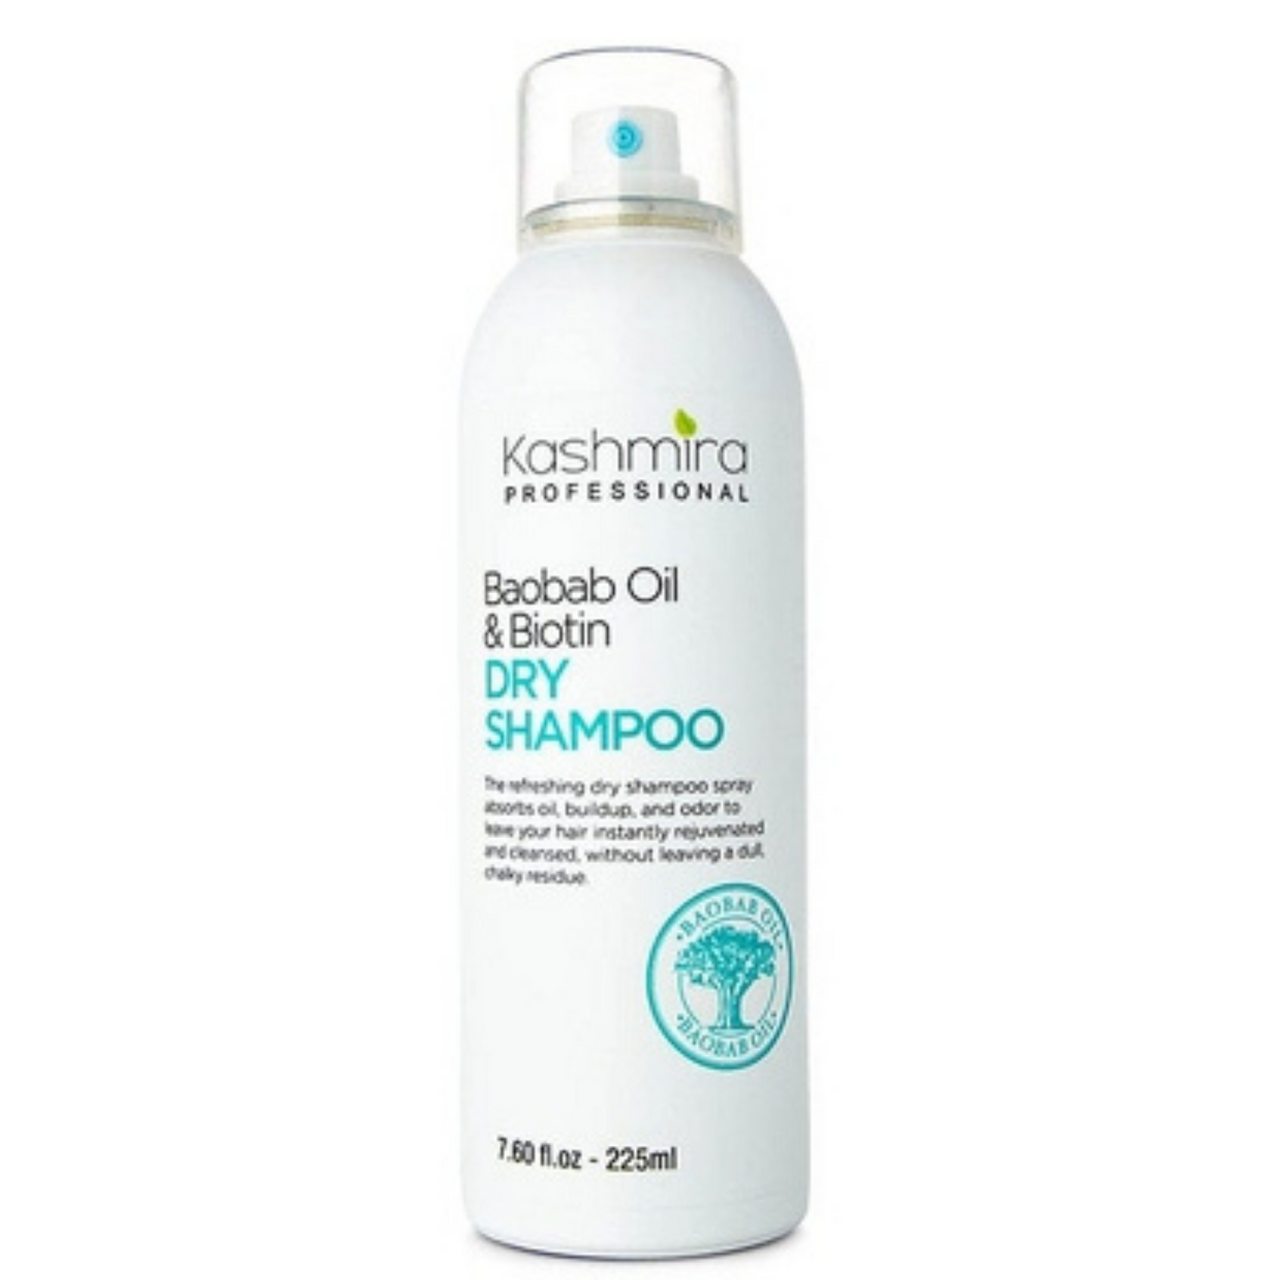 Kashmira Baobab Oil & Biotin Dry Shampoo - Absorbs Oil, Buildup, and Odor to Leave Your Hair Instantly Rejuvenated and Cleansed